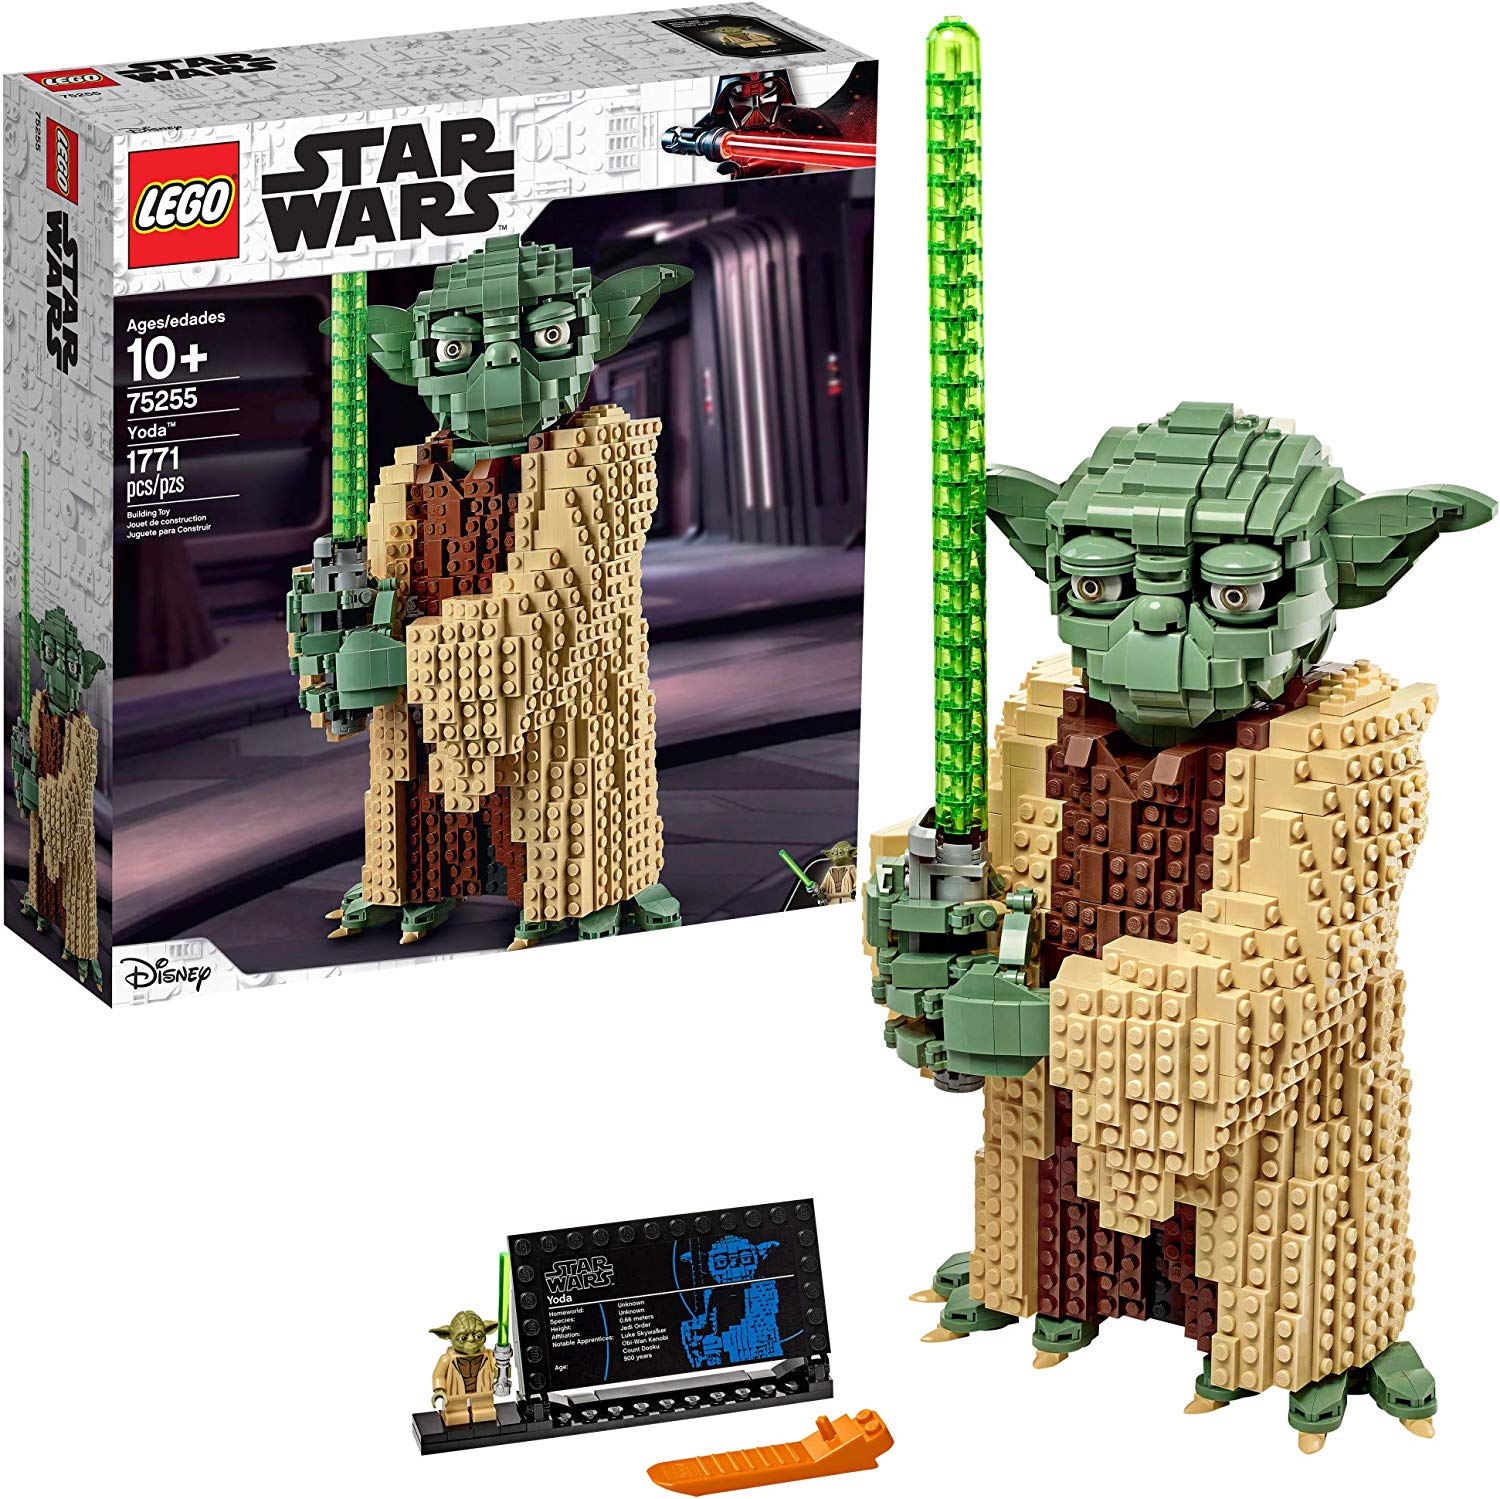 LEGO Star Wars: Attack of The Clones Yoda 75255 Yoda Building Model and Collectible Minifigure with Lightsaber, New 2019 (1,771 Pieces), @amazon.com or lego.com